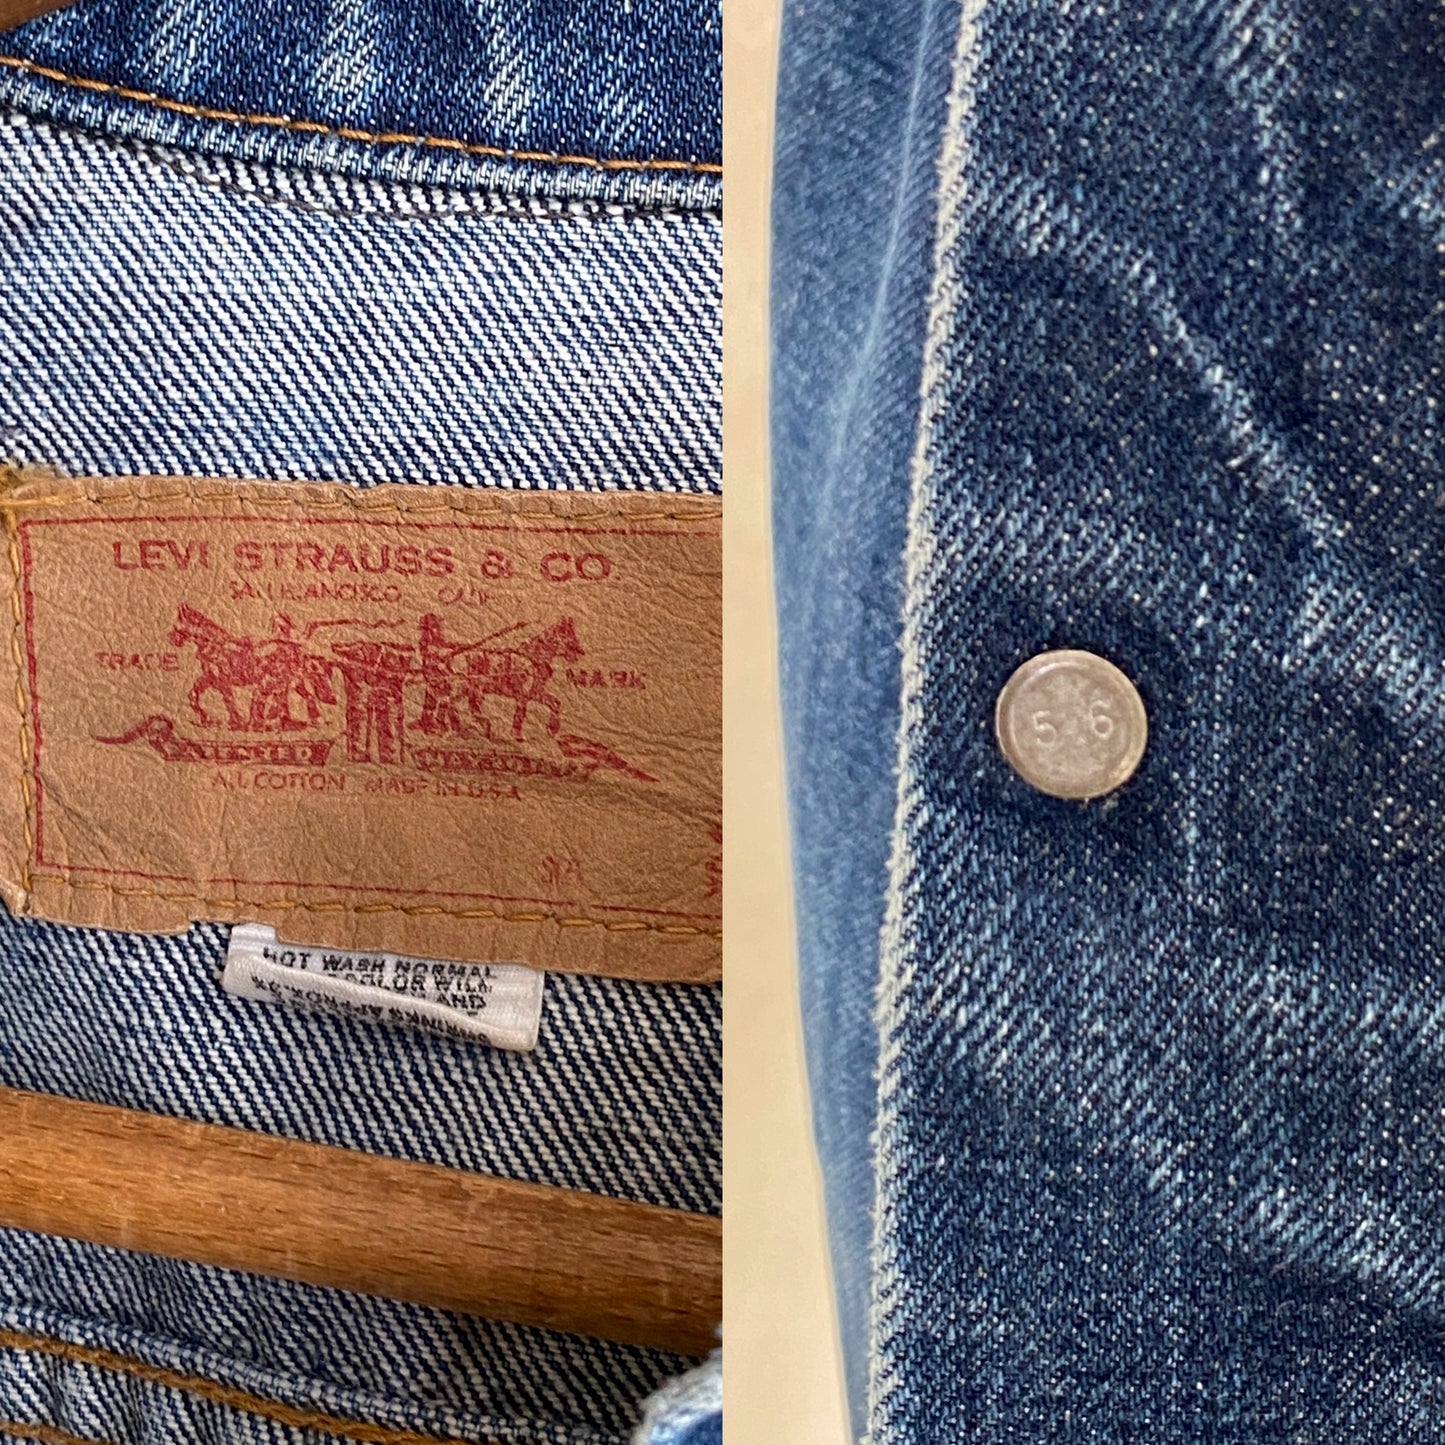 Vintage 1971 Levis jacket, size 36/38US, with single stitch detailing, made in the USA.